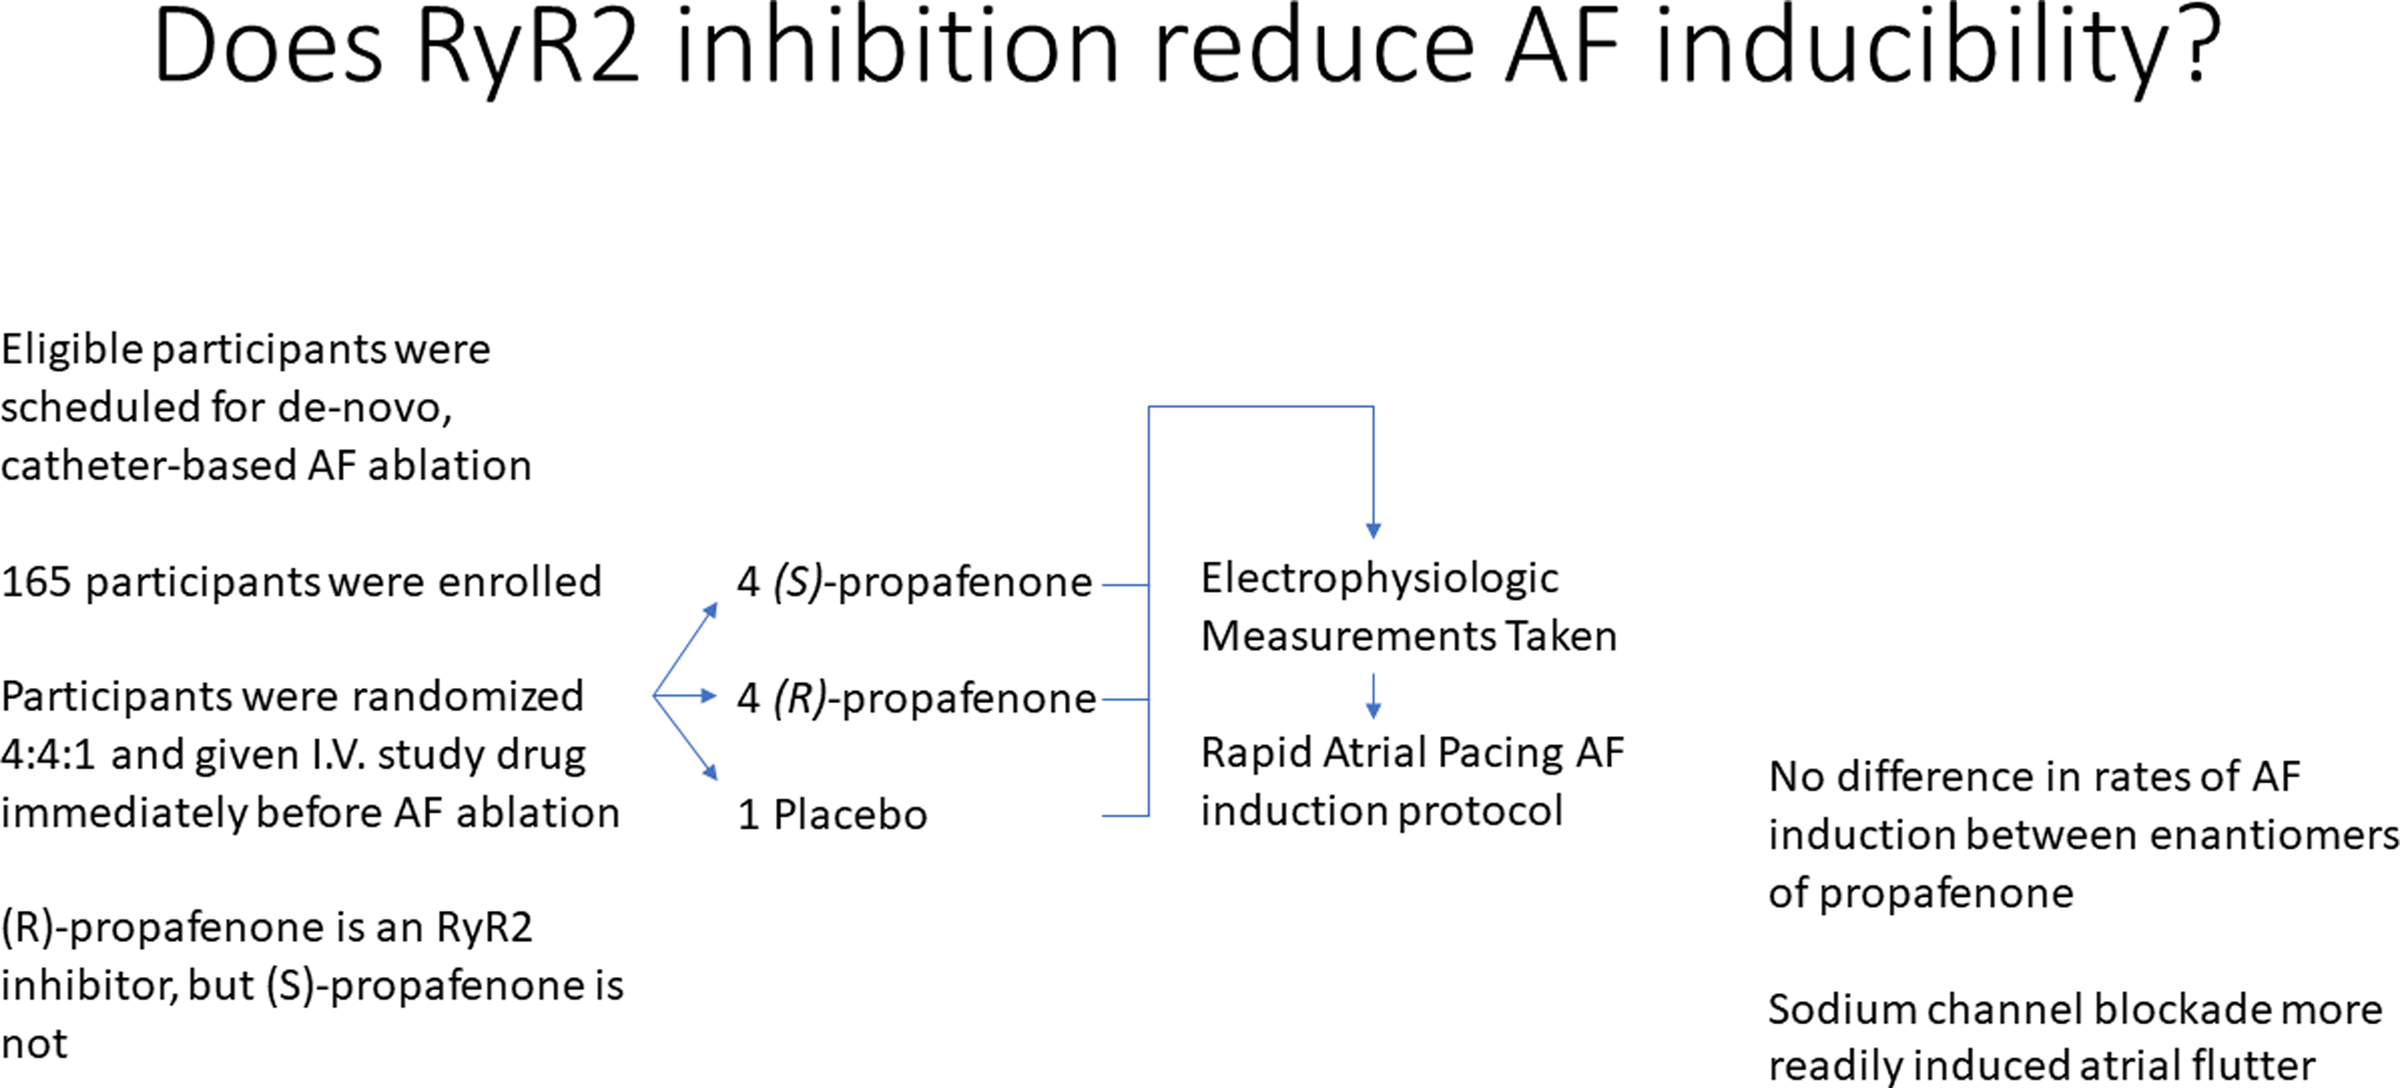 A Mechanistic Clinical Trial Using (R)- Versus (S)-Propafenone to Test RyR2 (Ryanodine Receptor) Inhibition for the Prevention of Atrial Fibrillation Induction